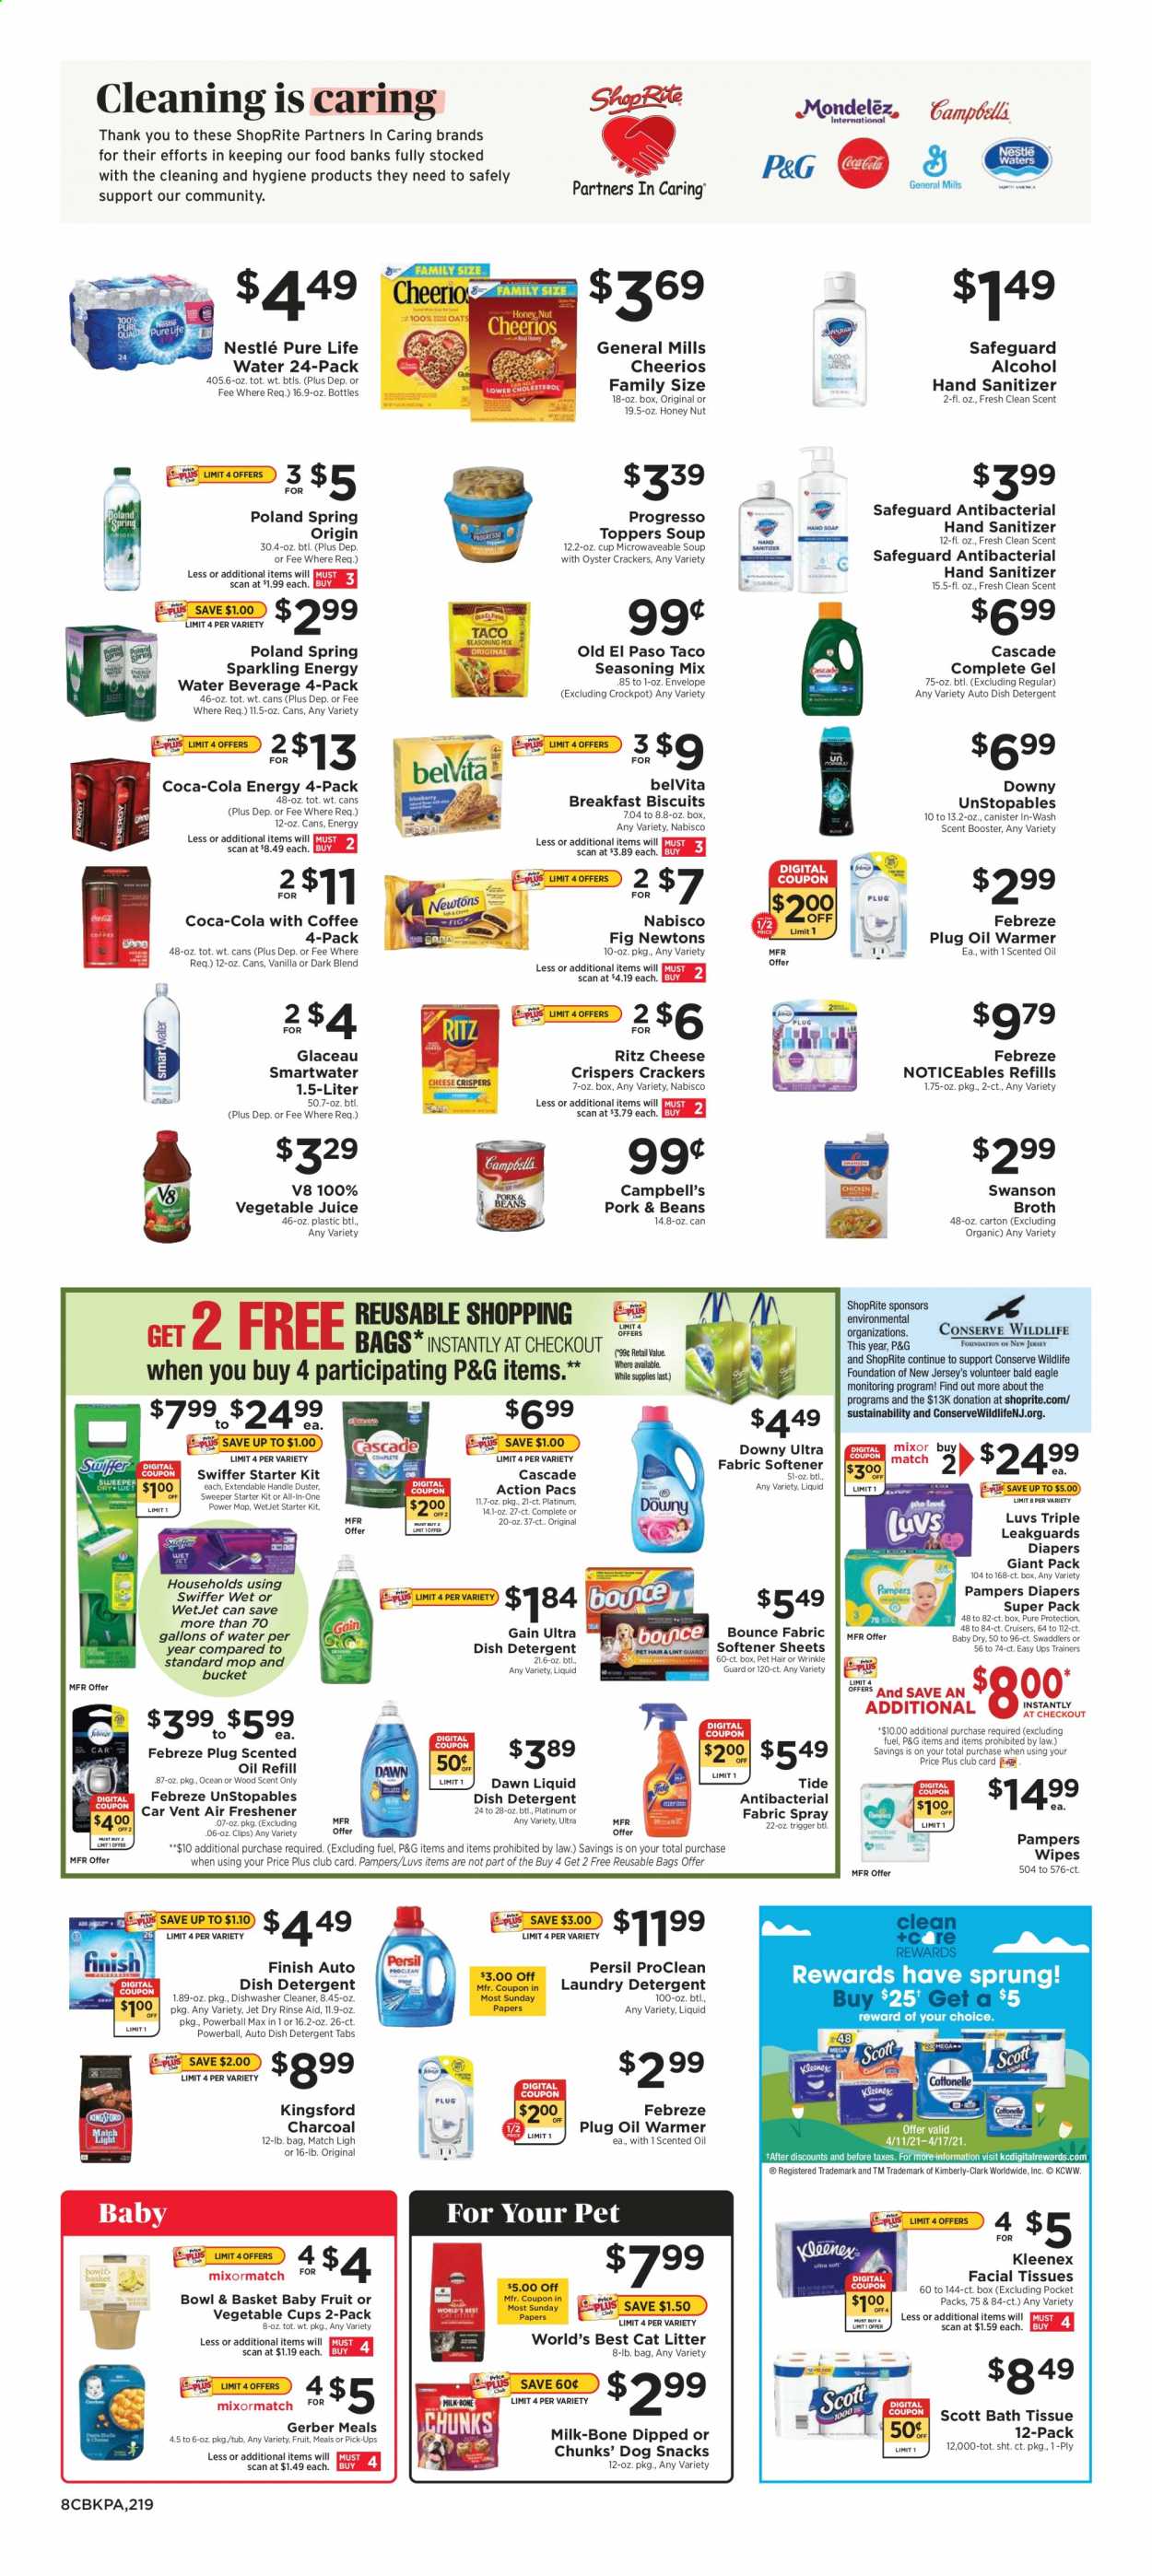 thumbnail - ShopRite Flyer - 04/11/2021 - 04/17/2021 - Sales products - Old El Paso, Bowl & Basket, beans, oysters, Campbell's, soup, Progresso, milk, Nestlé, crackers, biscuit, RITZ, Gerber, snack, oyster crackers, broth, Cheerios, belVita, spice, oil, Coca-Cola, juice, vegetable juice, Pure Life Water, Pampers, nappies, bath tissue, Kleenex, detergent, Febreze, Gain, wipes, cleaner, Cascade, Tide, Unstopables, Persil, fabric softener, laundry detergent, Bounce, dishwashing liquid, dishwasher cleaner, Jet, facial tissues, mop, duster, WetJet, canister, cup, bowl, envelope, air freshener, scented oil, cat litter, Scott. Page 8.